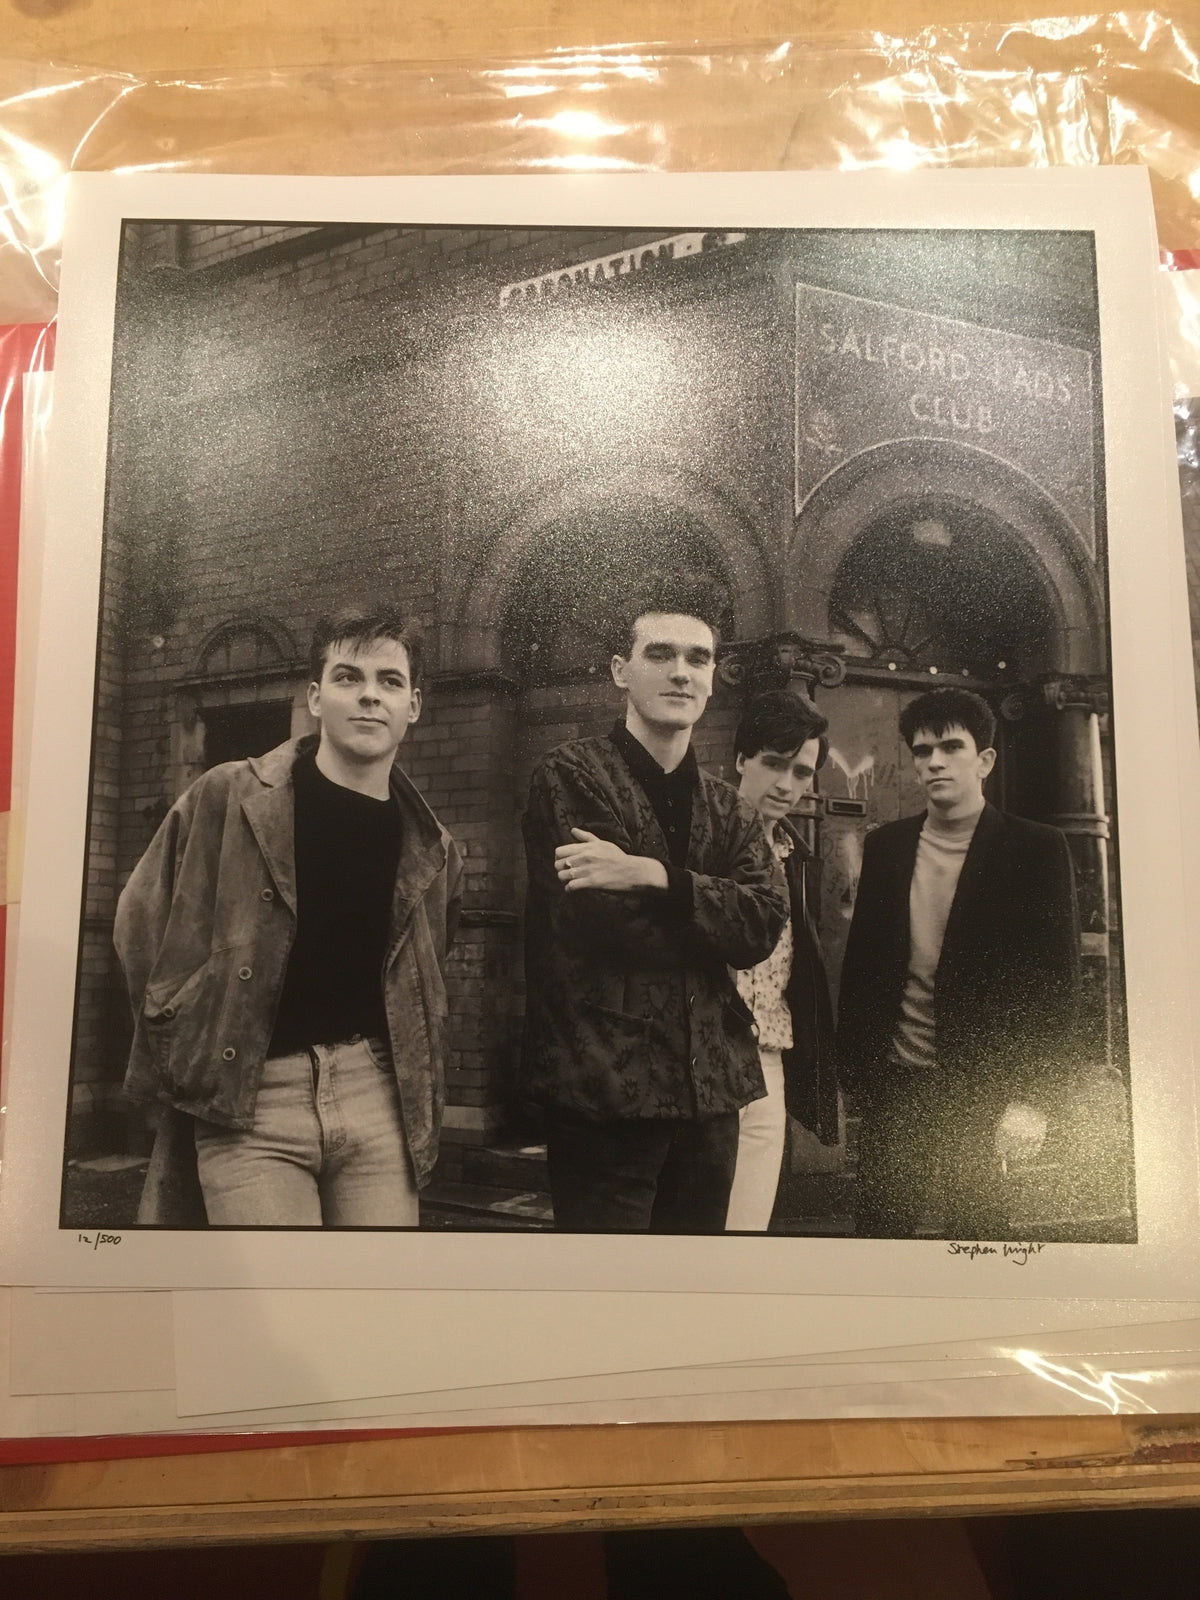 Stephen Wright - The Smiths - Salford Lads Club 1985 No.2